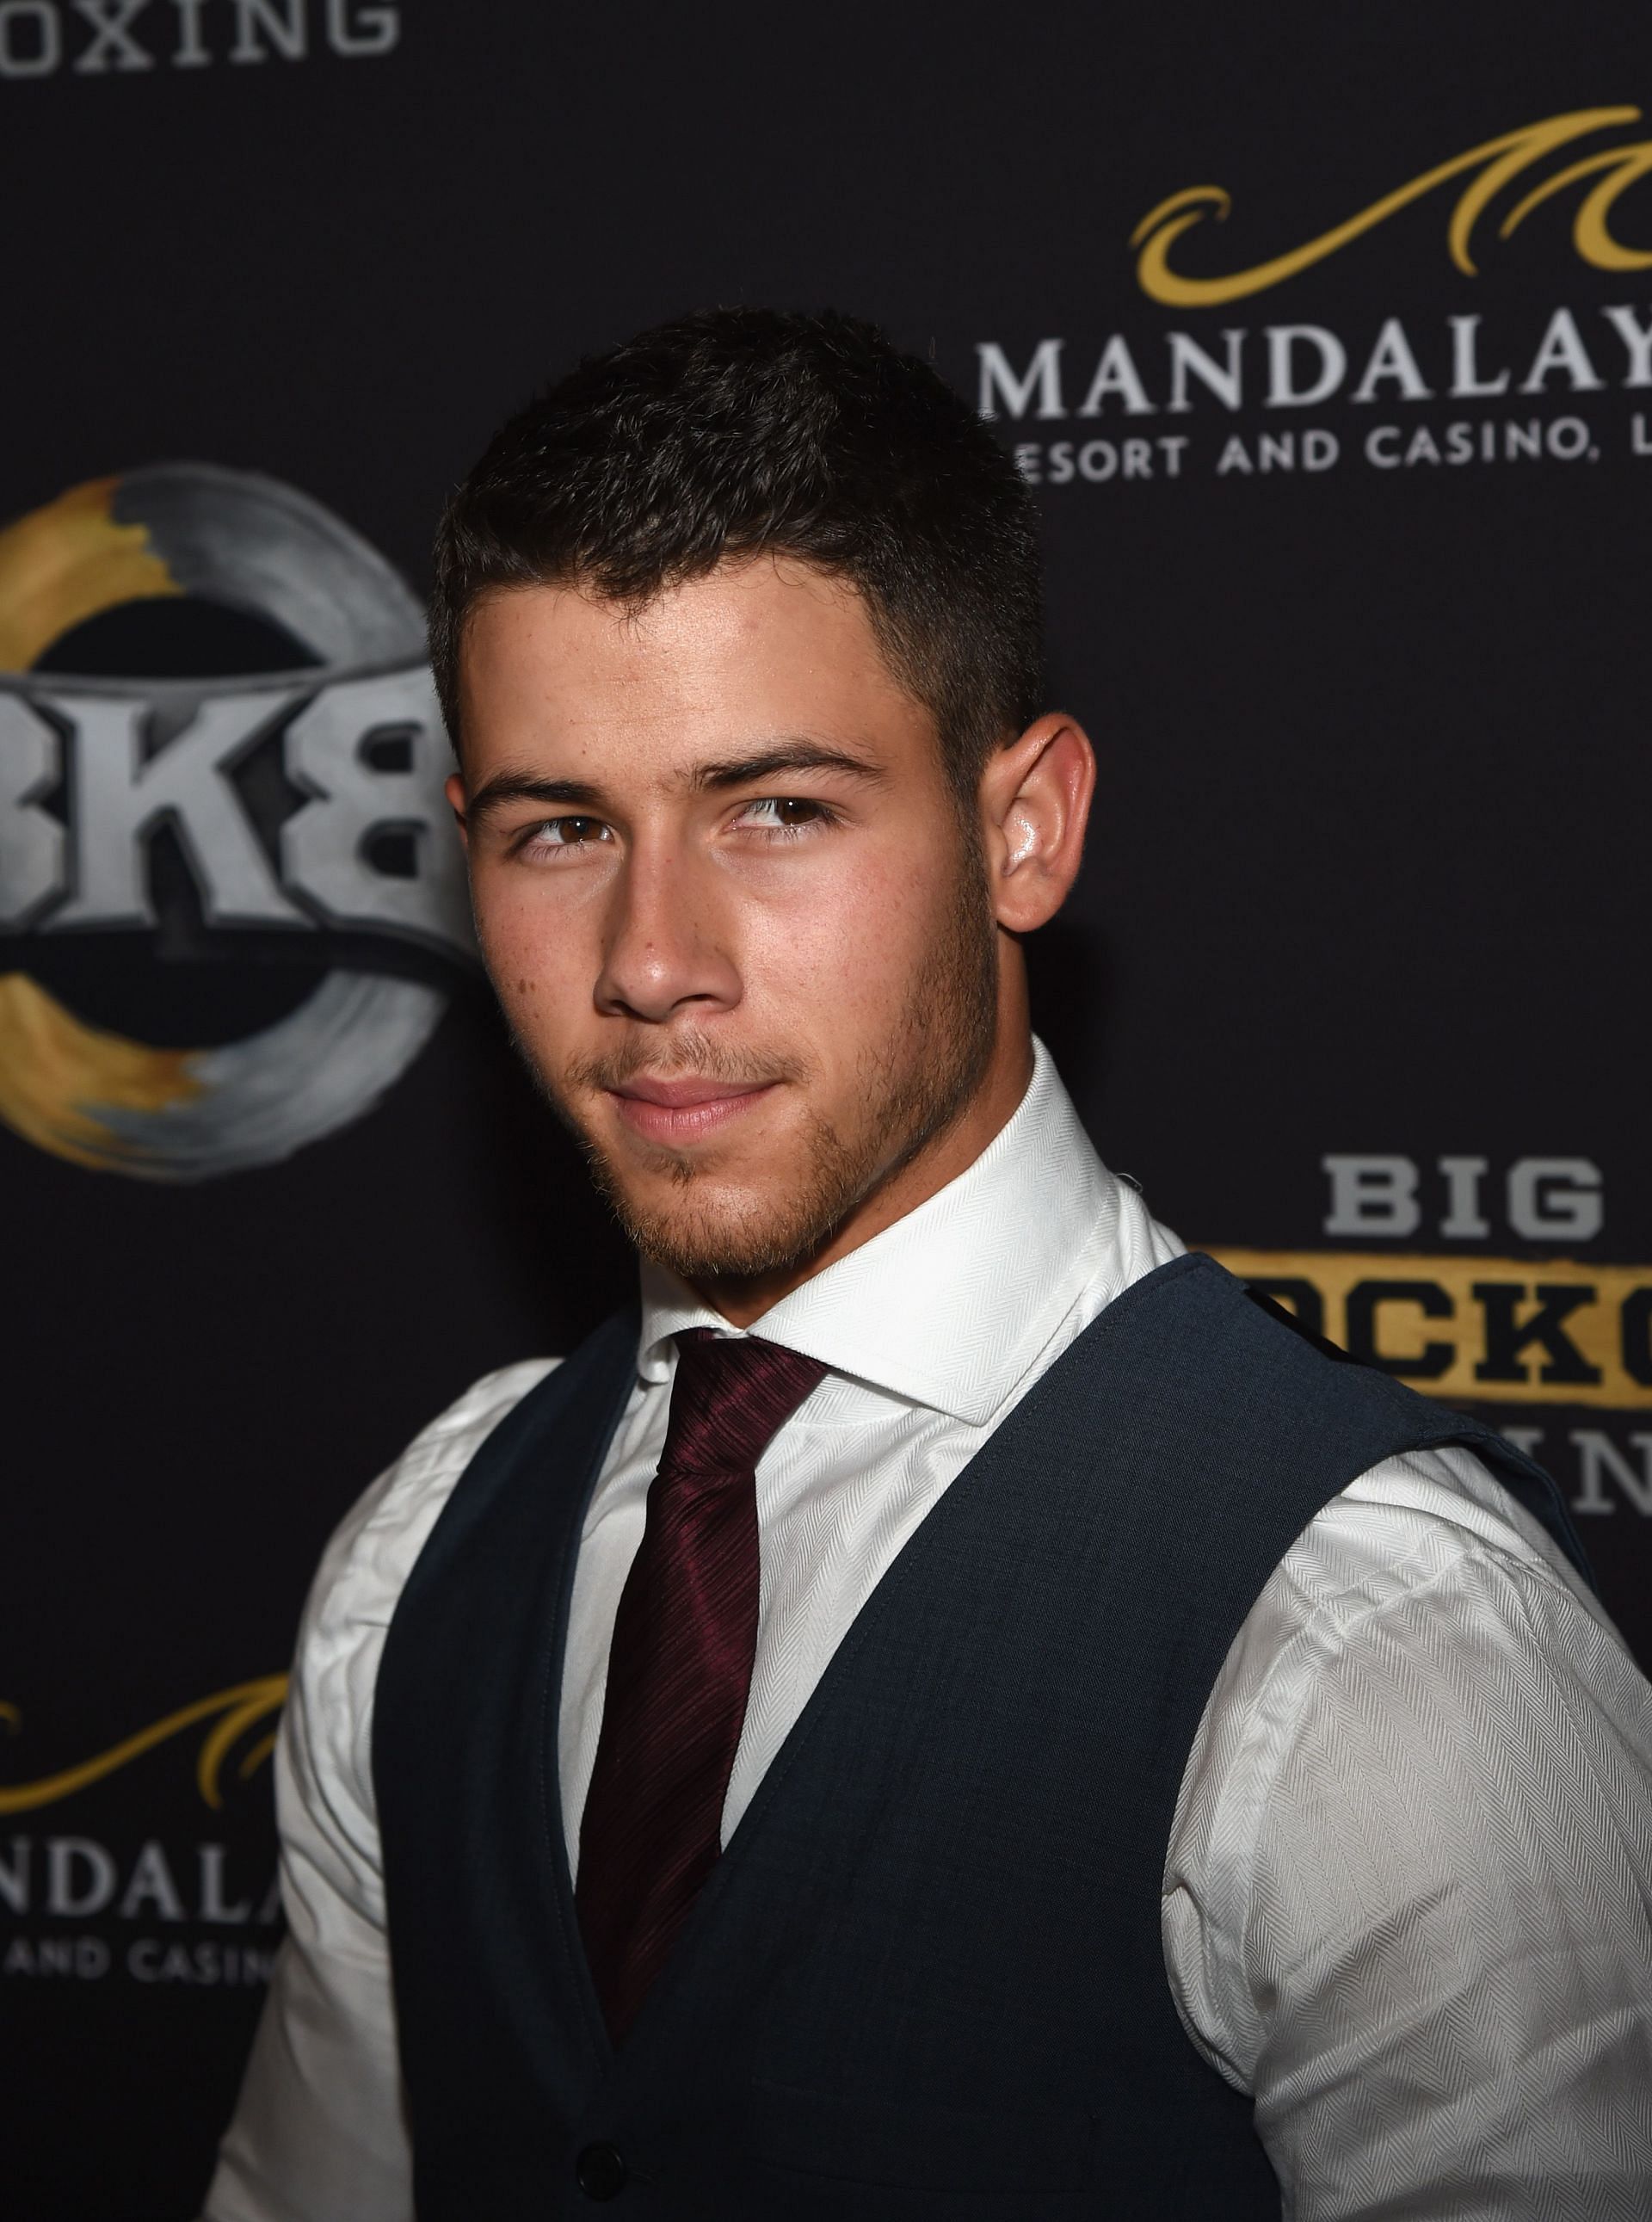 Nick Jonas will perform at the NFL Thanksgiving show.